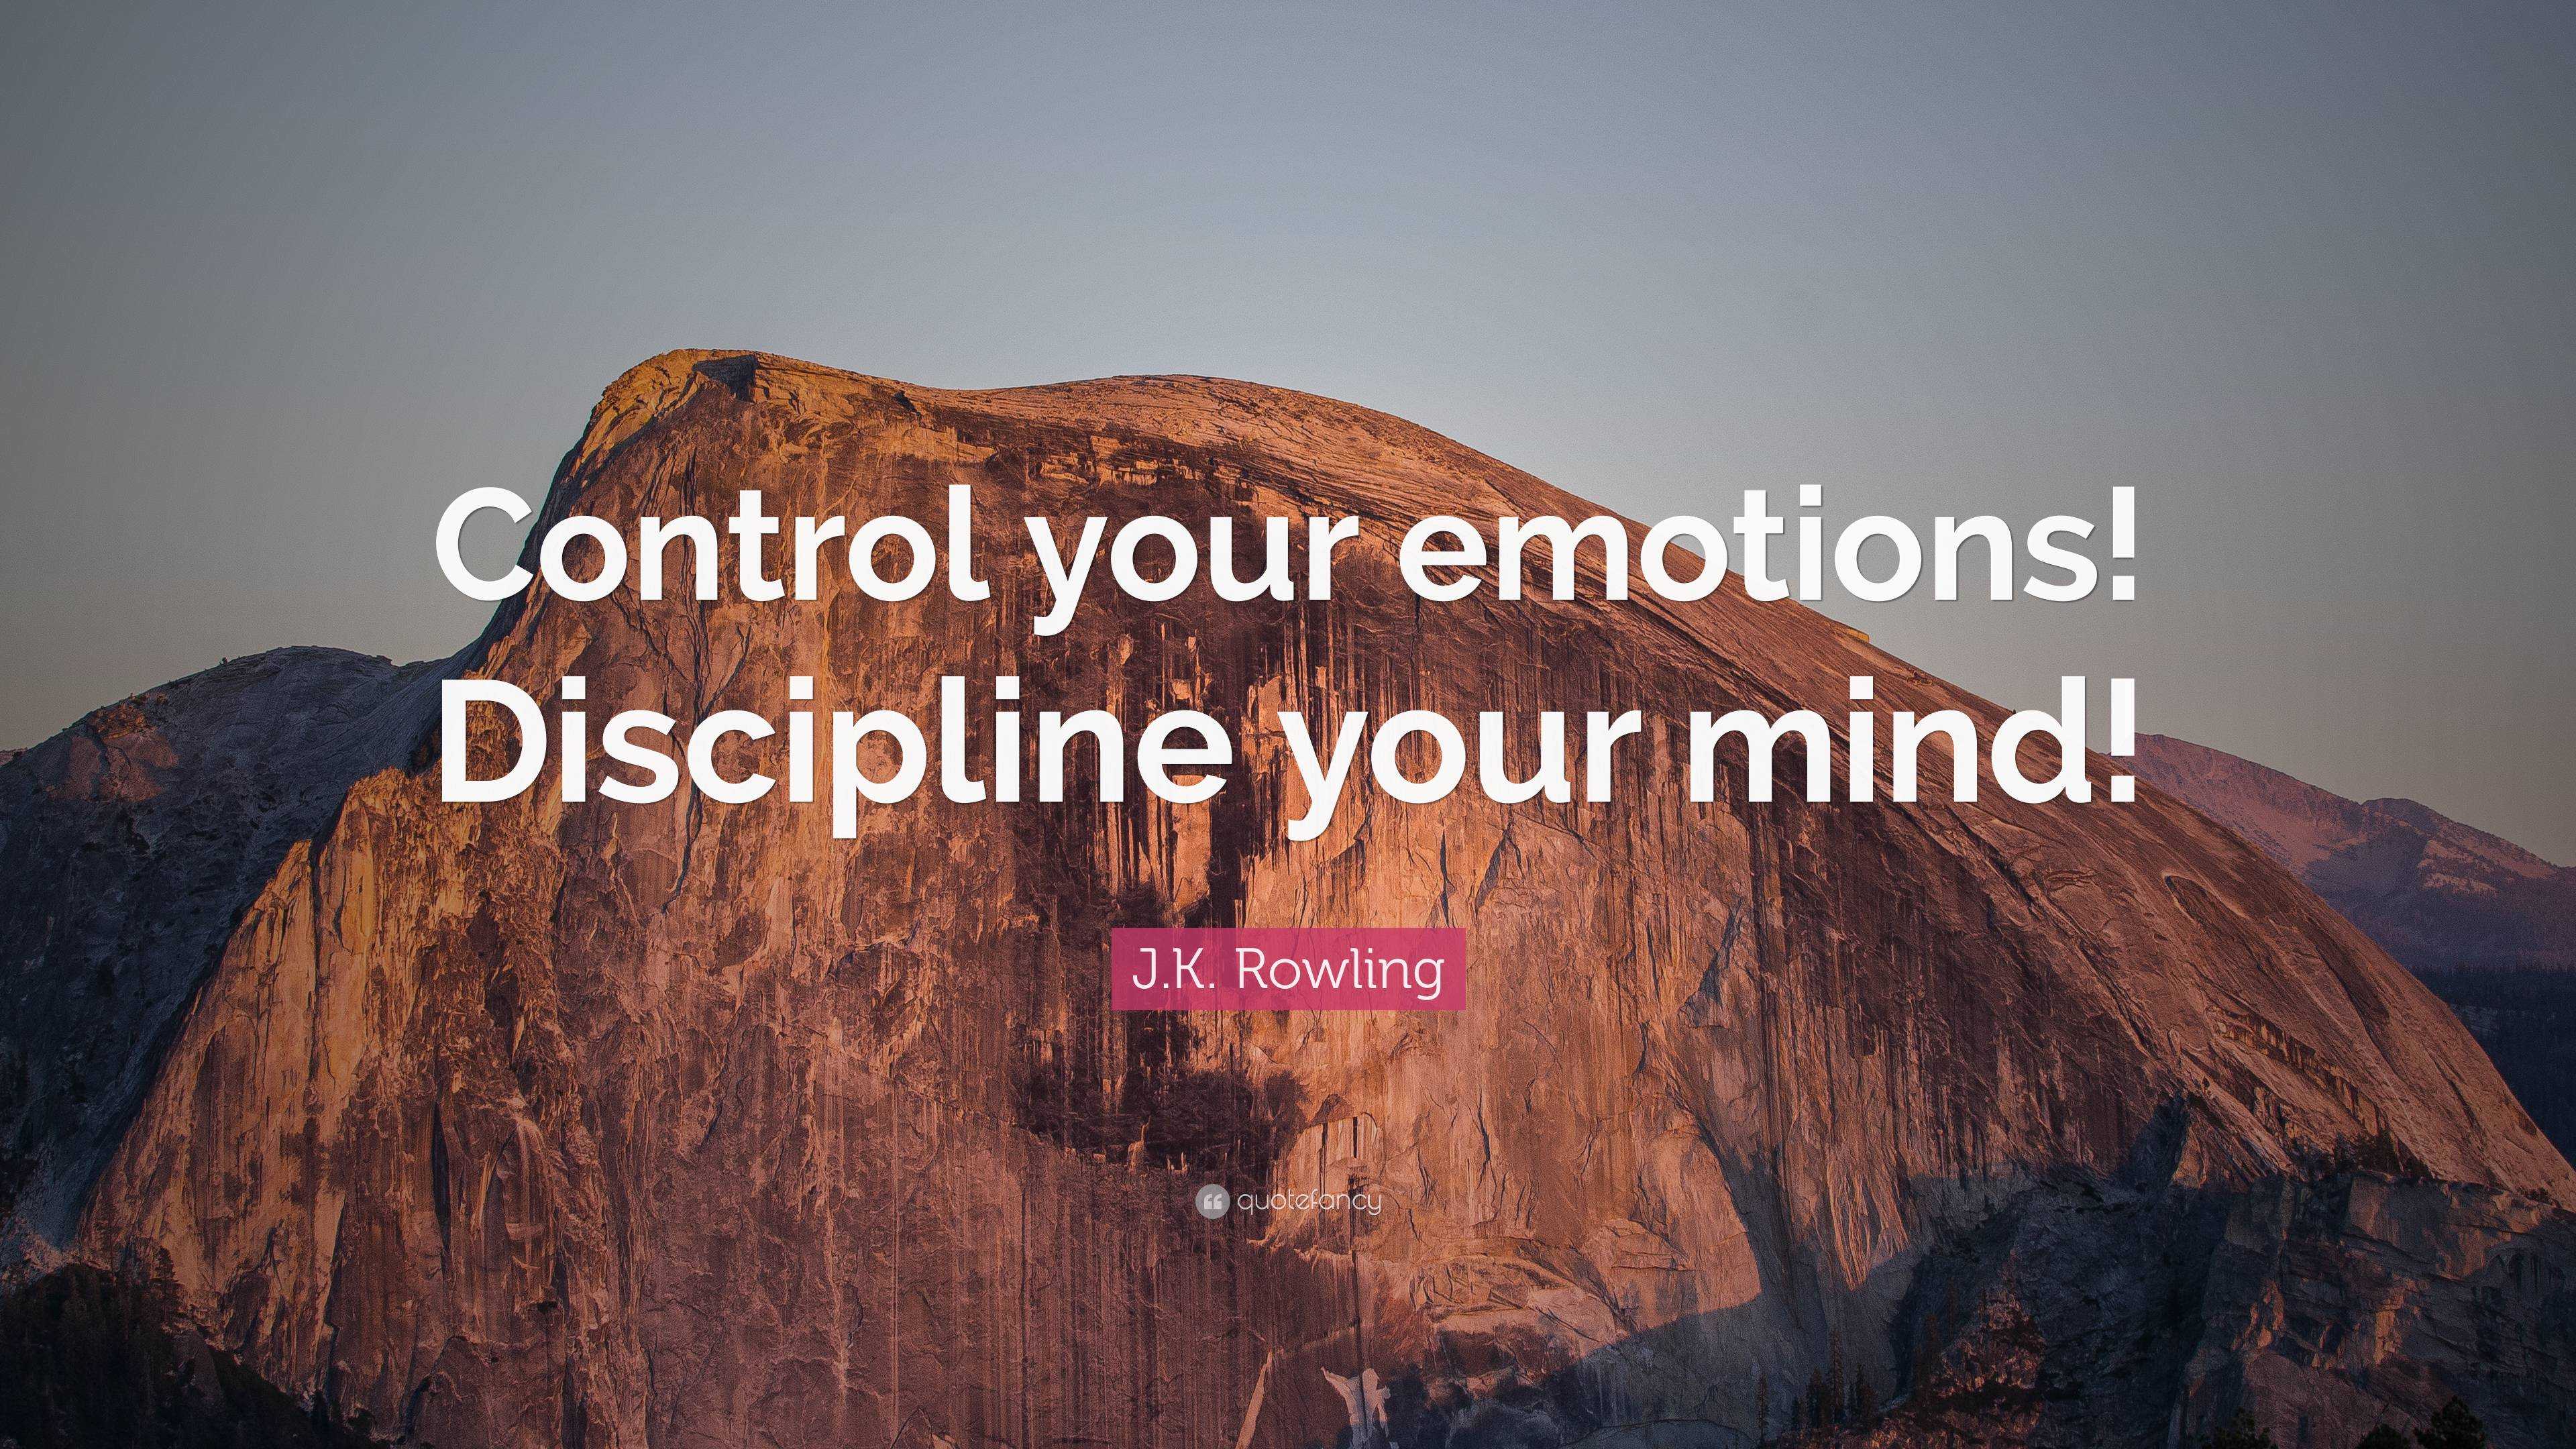 . Rowling Quote: “Control your emotions! Discipline your mind!”